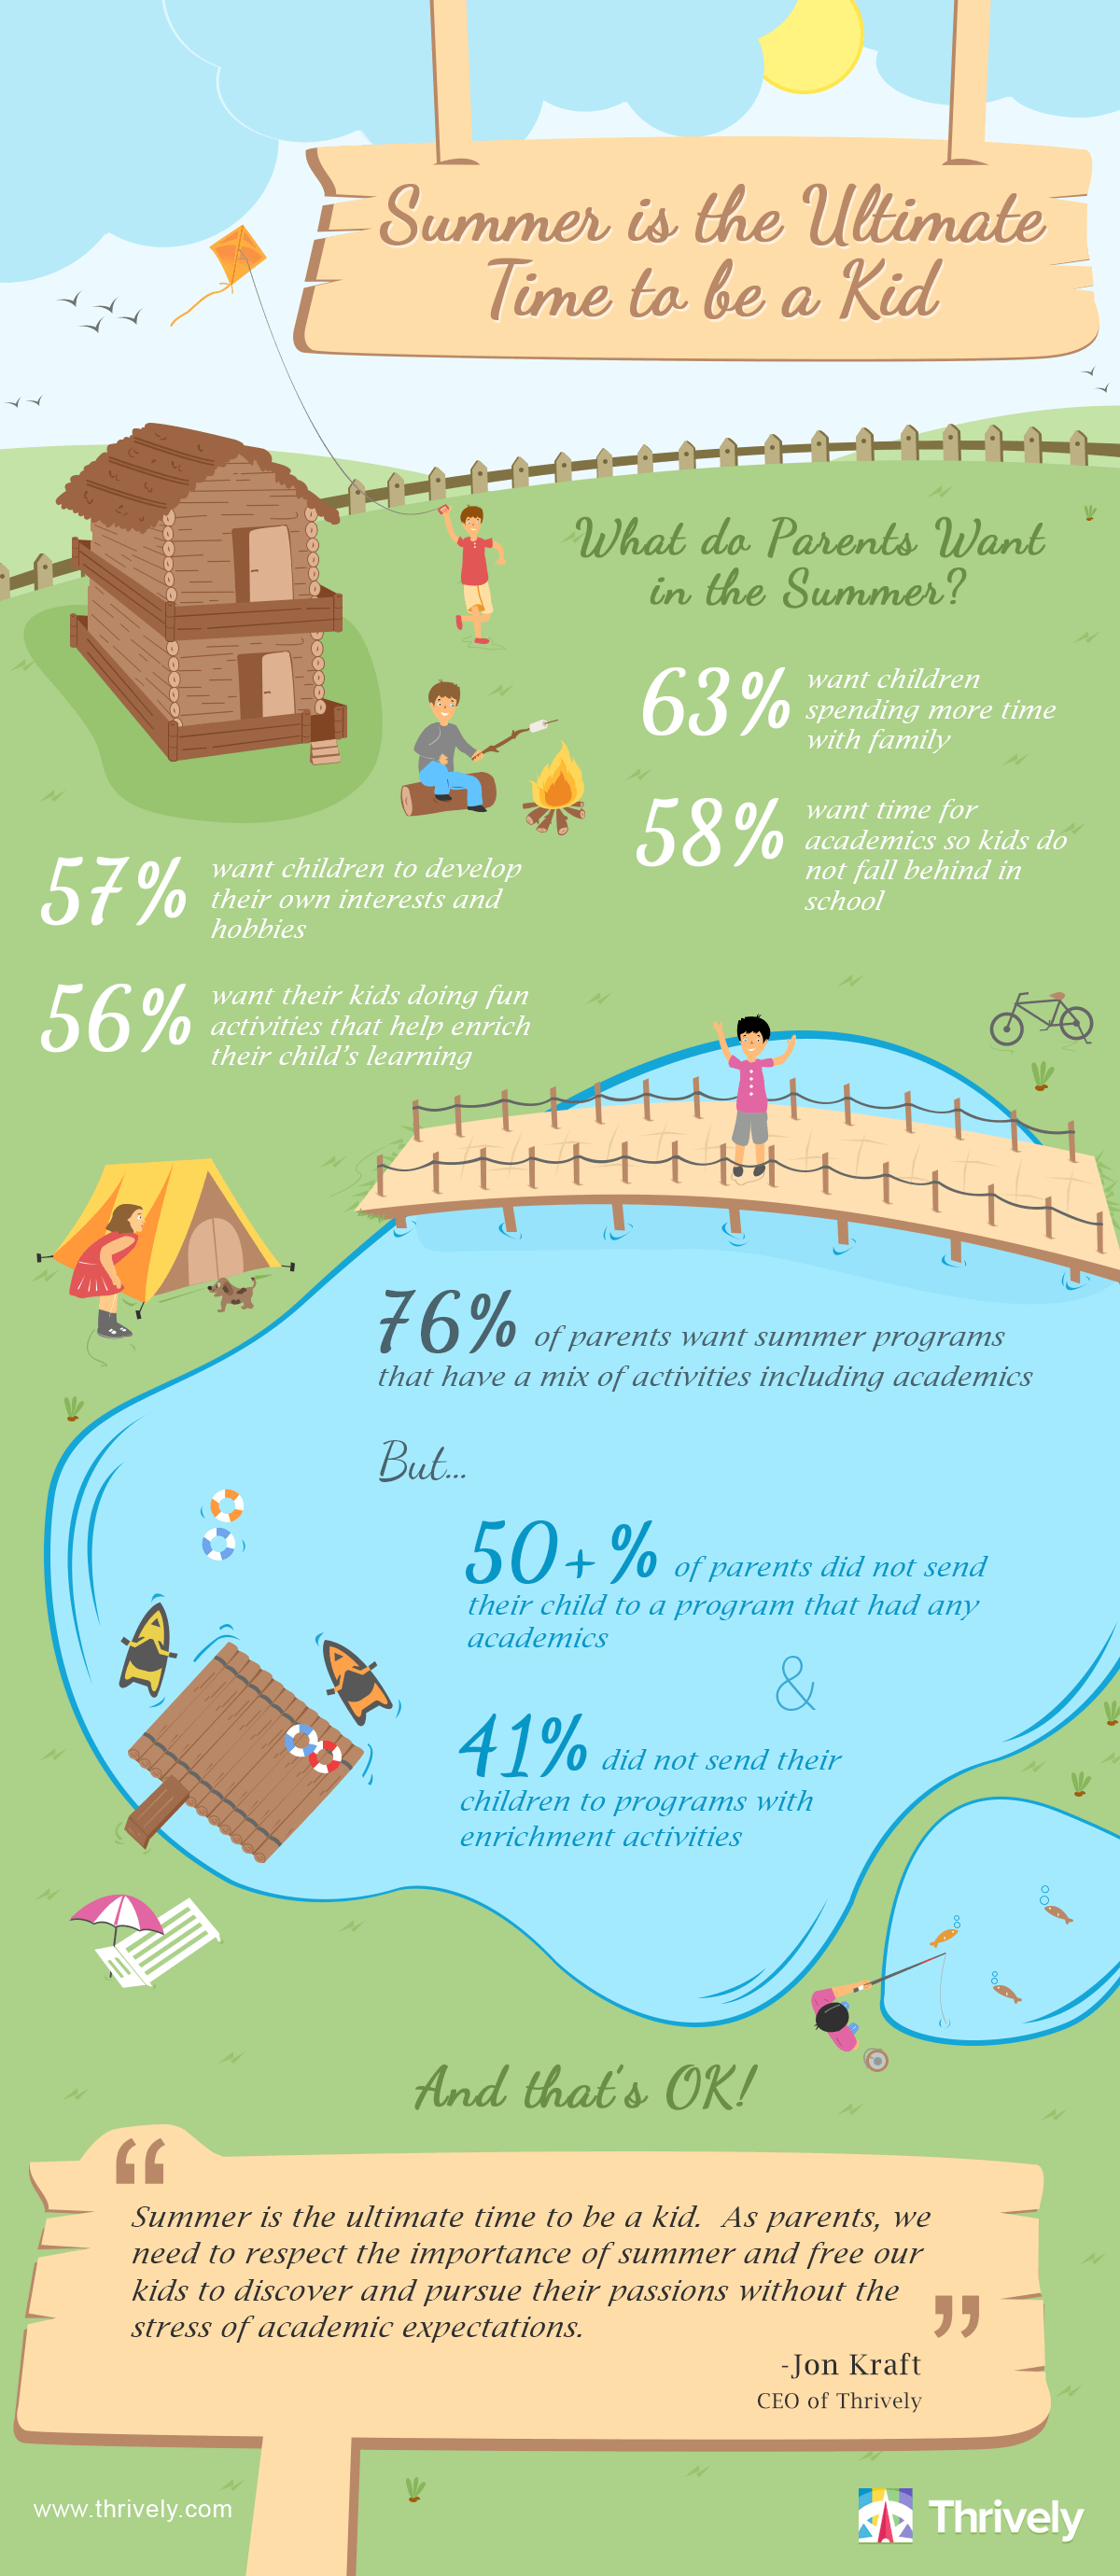 Summer is the Ultimate Time to Be a Kid Infographic